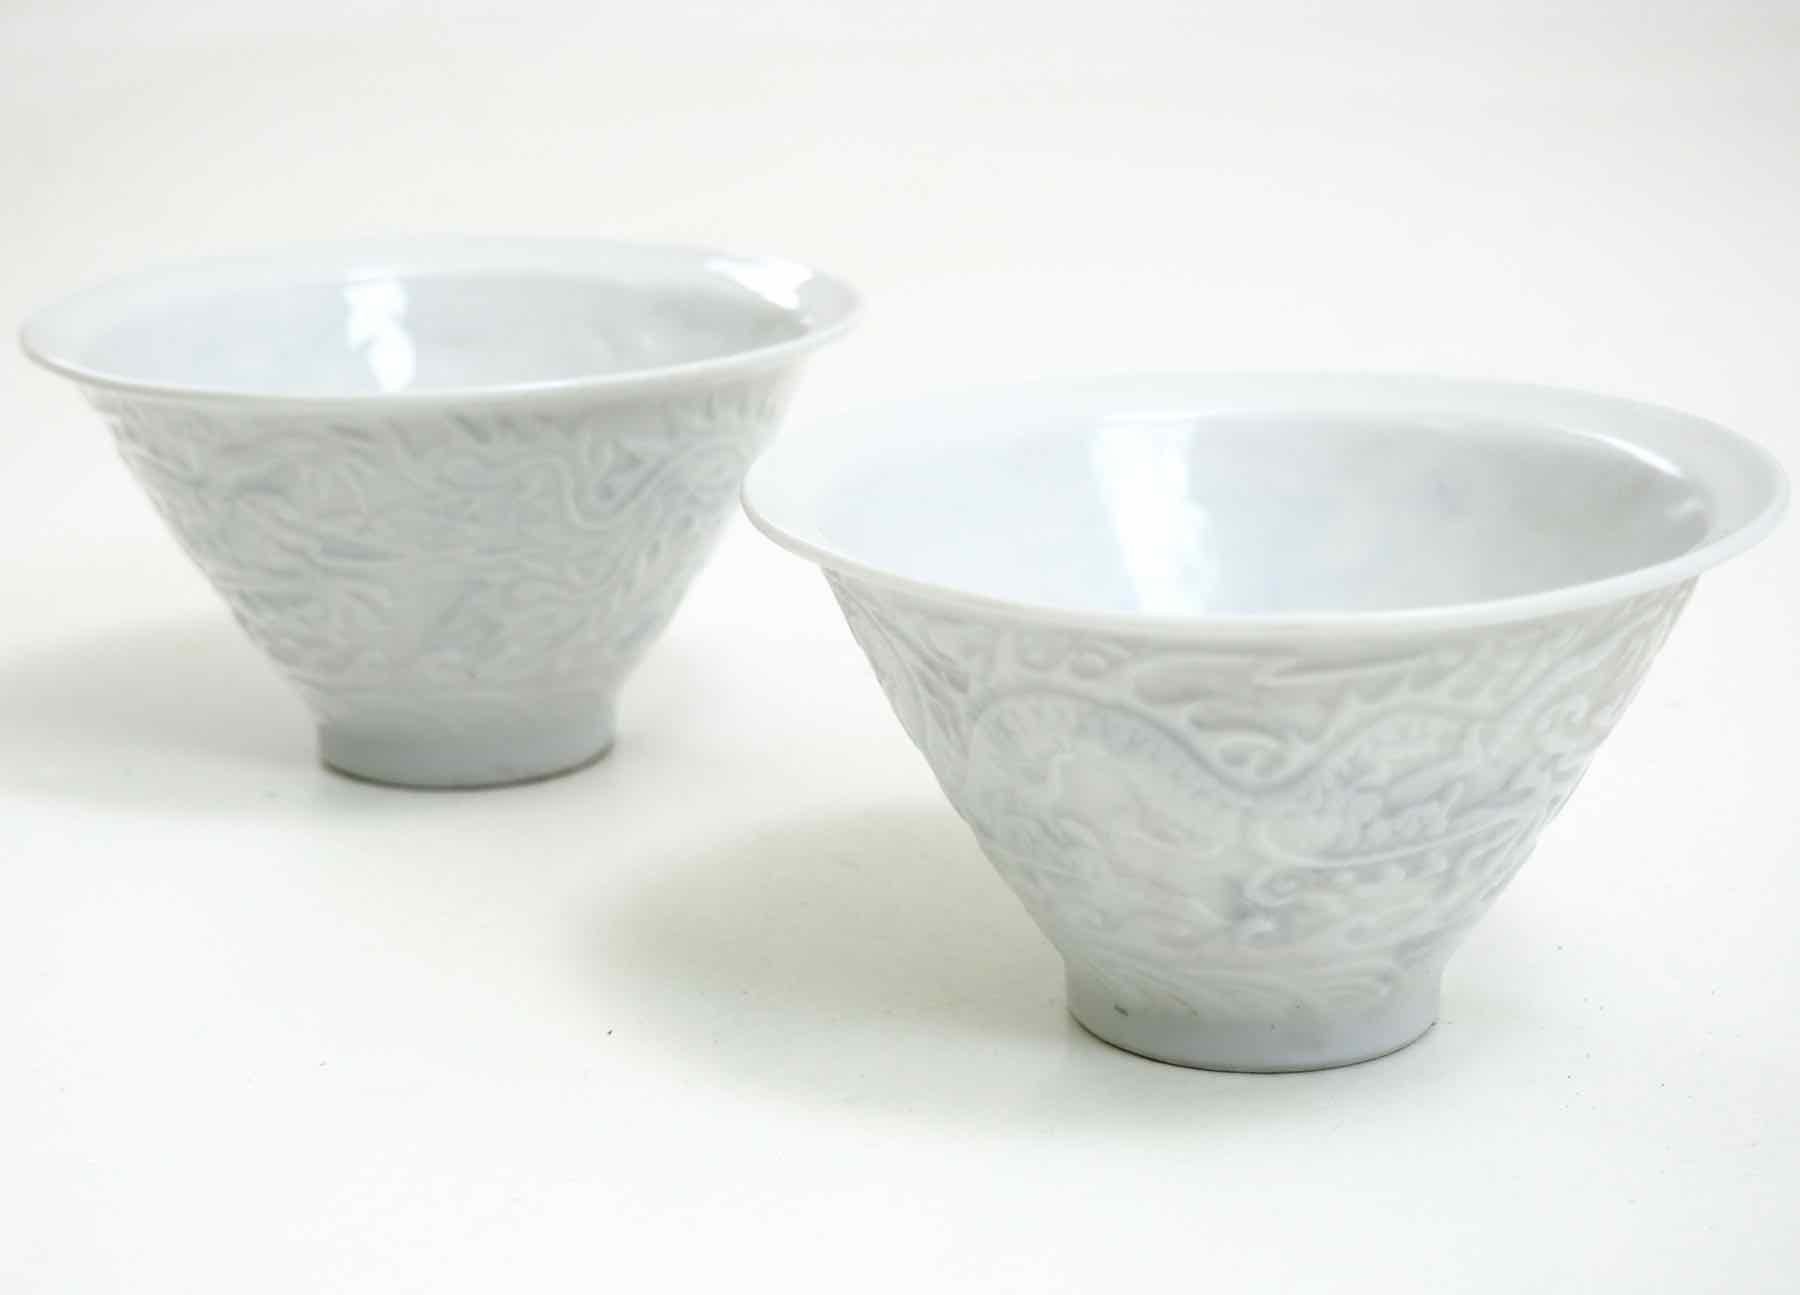 Pair of Chinese bowls, signed, 18th-19th century
Measures: H. 8 Dia. 15 cm 
H. 3.1 Dia. 5.9 in.